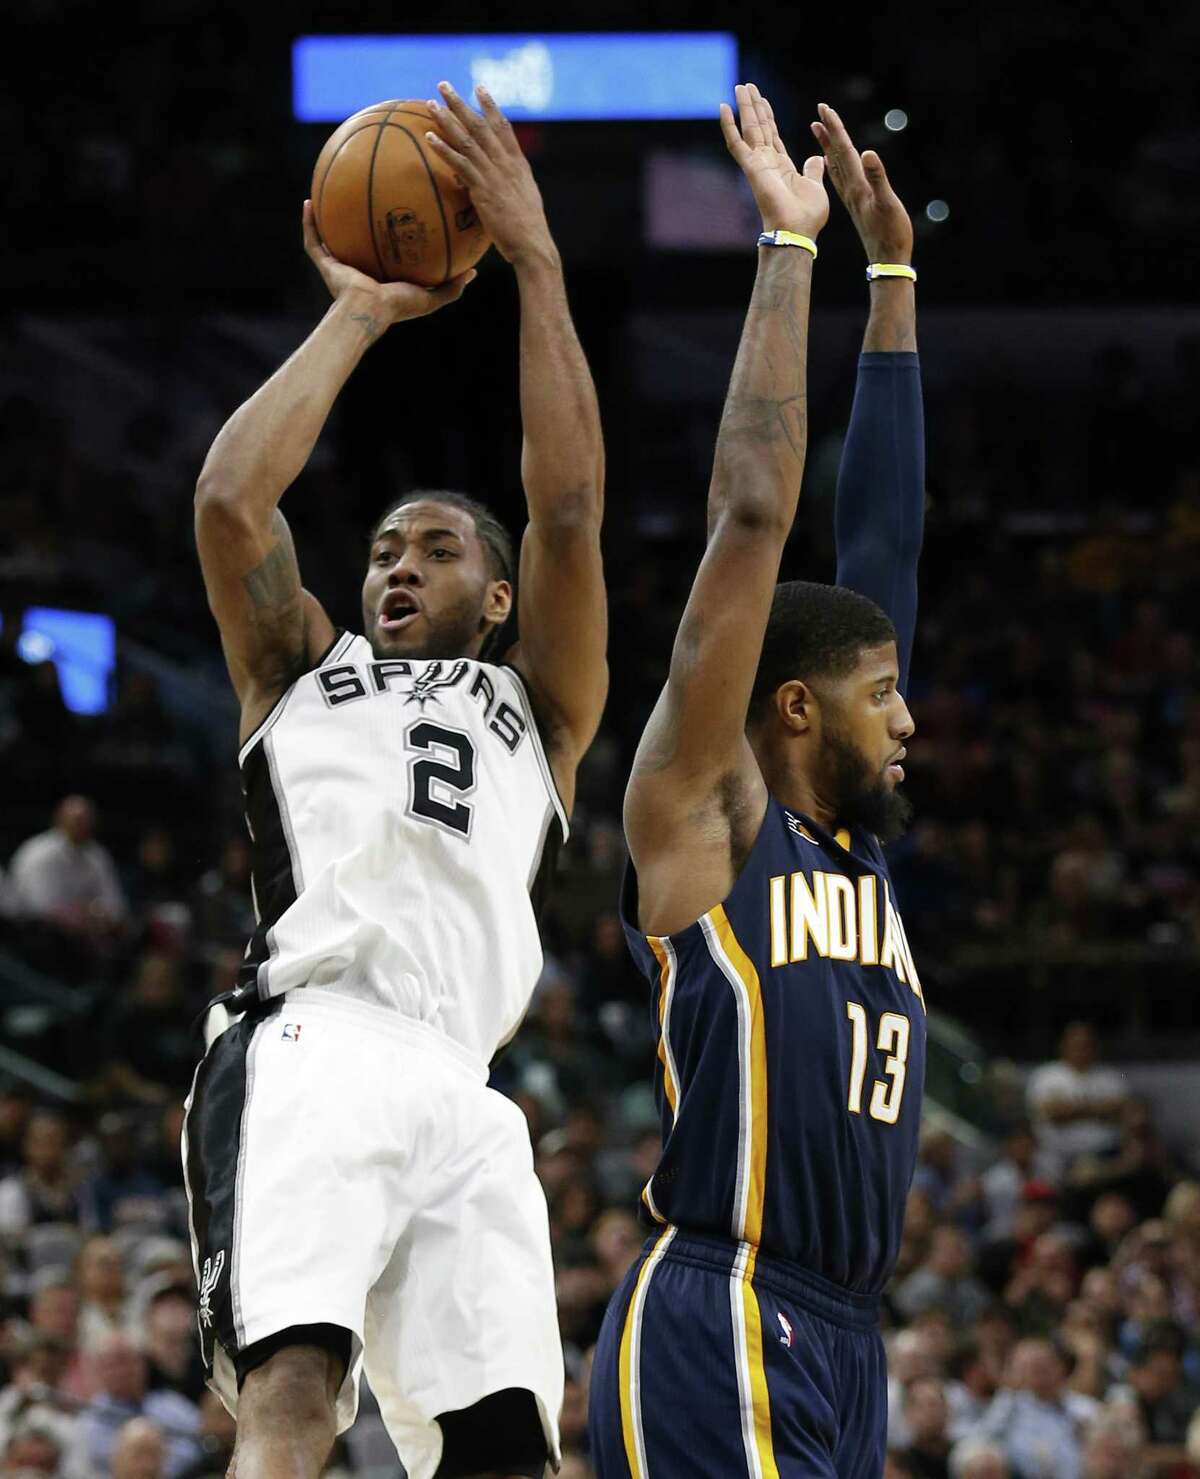 ***This is NOT the GAME WINNING shot*** Spurs?’ Kawhi Leonard (02) scores after getting fouled by Indiana Pacers?’ Paul George (13) during their game at the AT&T Center on Wednesday, Mar. 1, 2017. Spurs defeated the Pacers, 100-99. (Kin Man Hui/San Antonio Express-News)